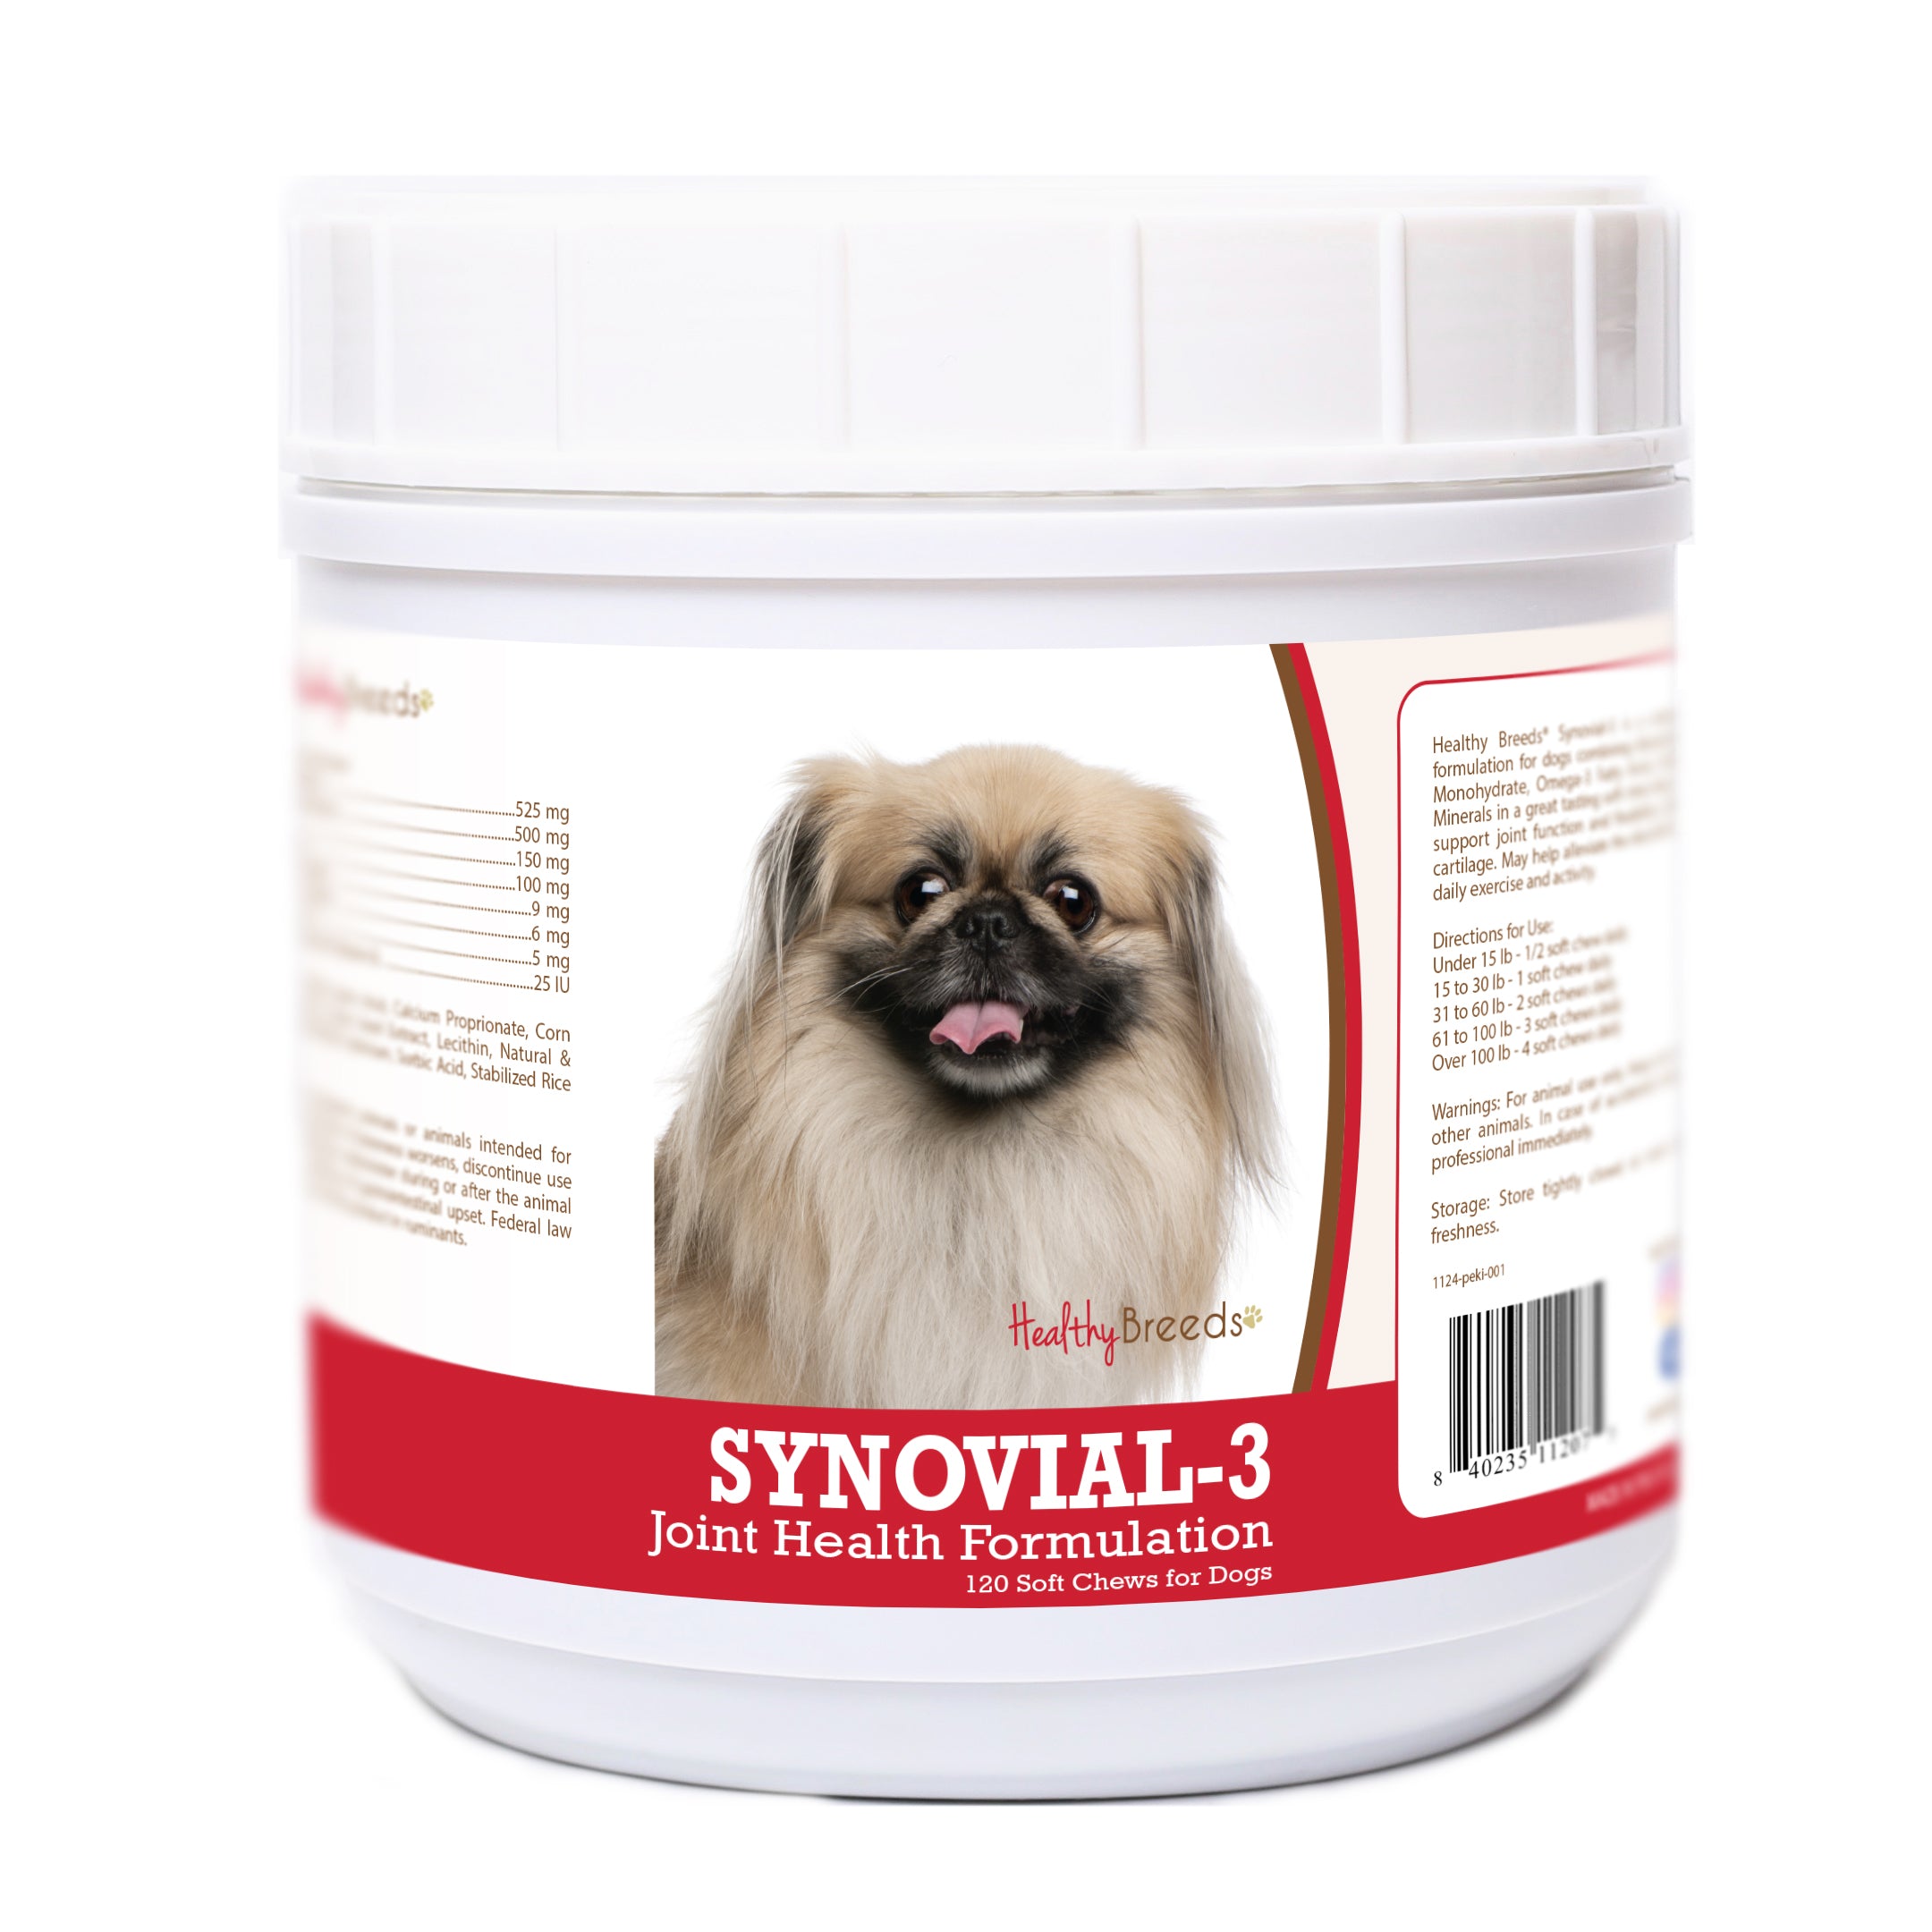 Pekingese Synovial-3 Joint Health Formulation Soft Chews 120 Count